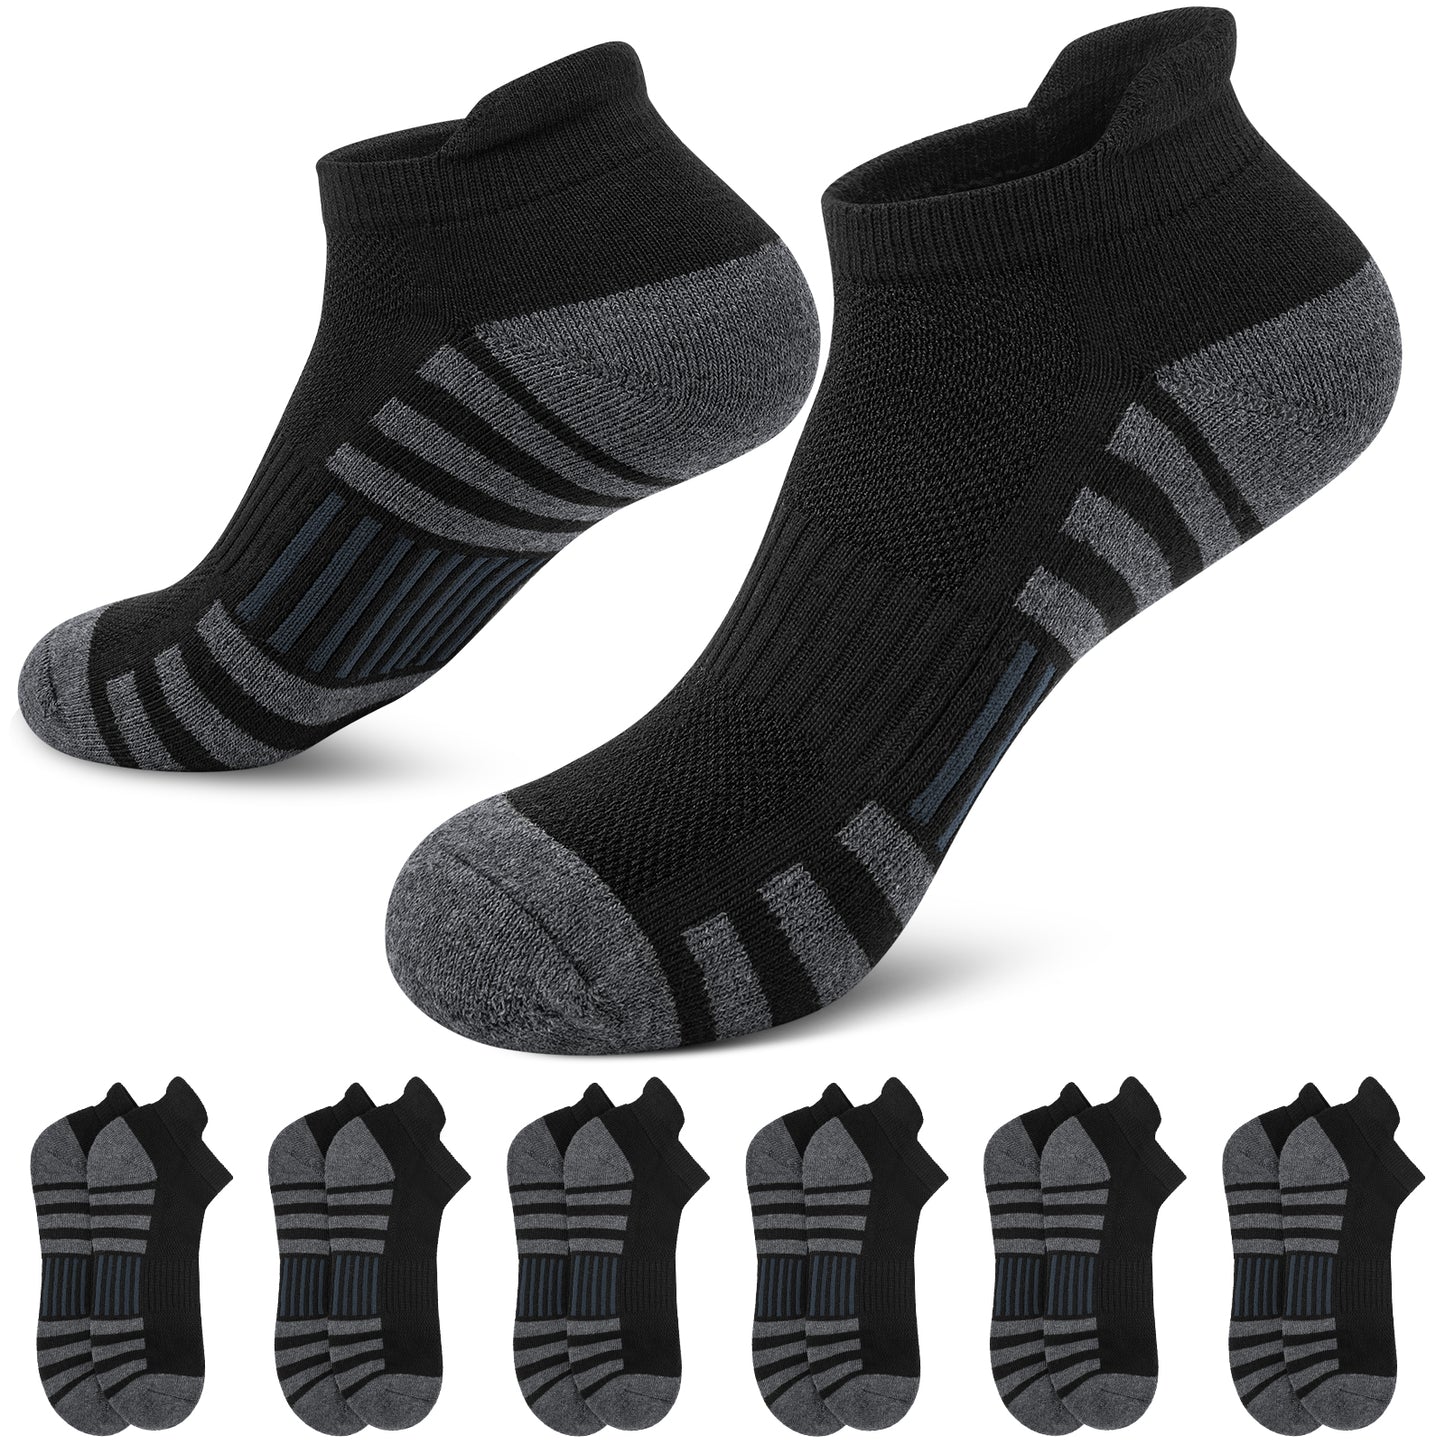 Loritta 12 Pairs Mens Ankle Athletic Running Socks, Cushioned Breathable Low Cut Sports Tab Socks for Men